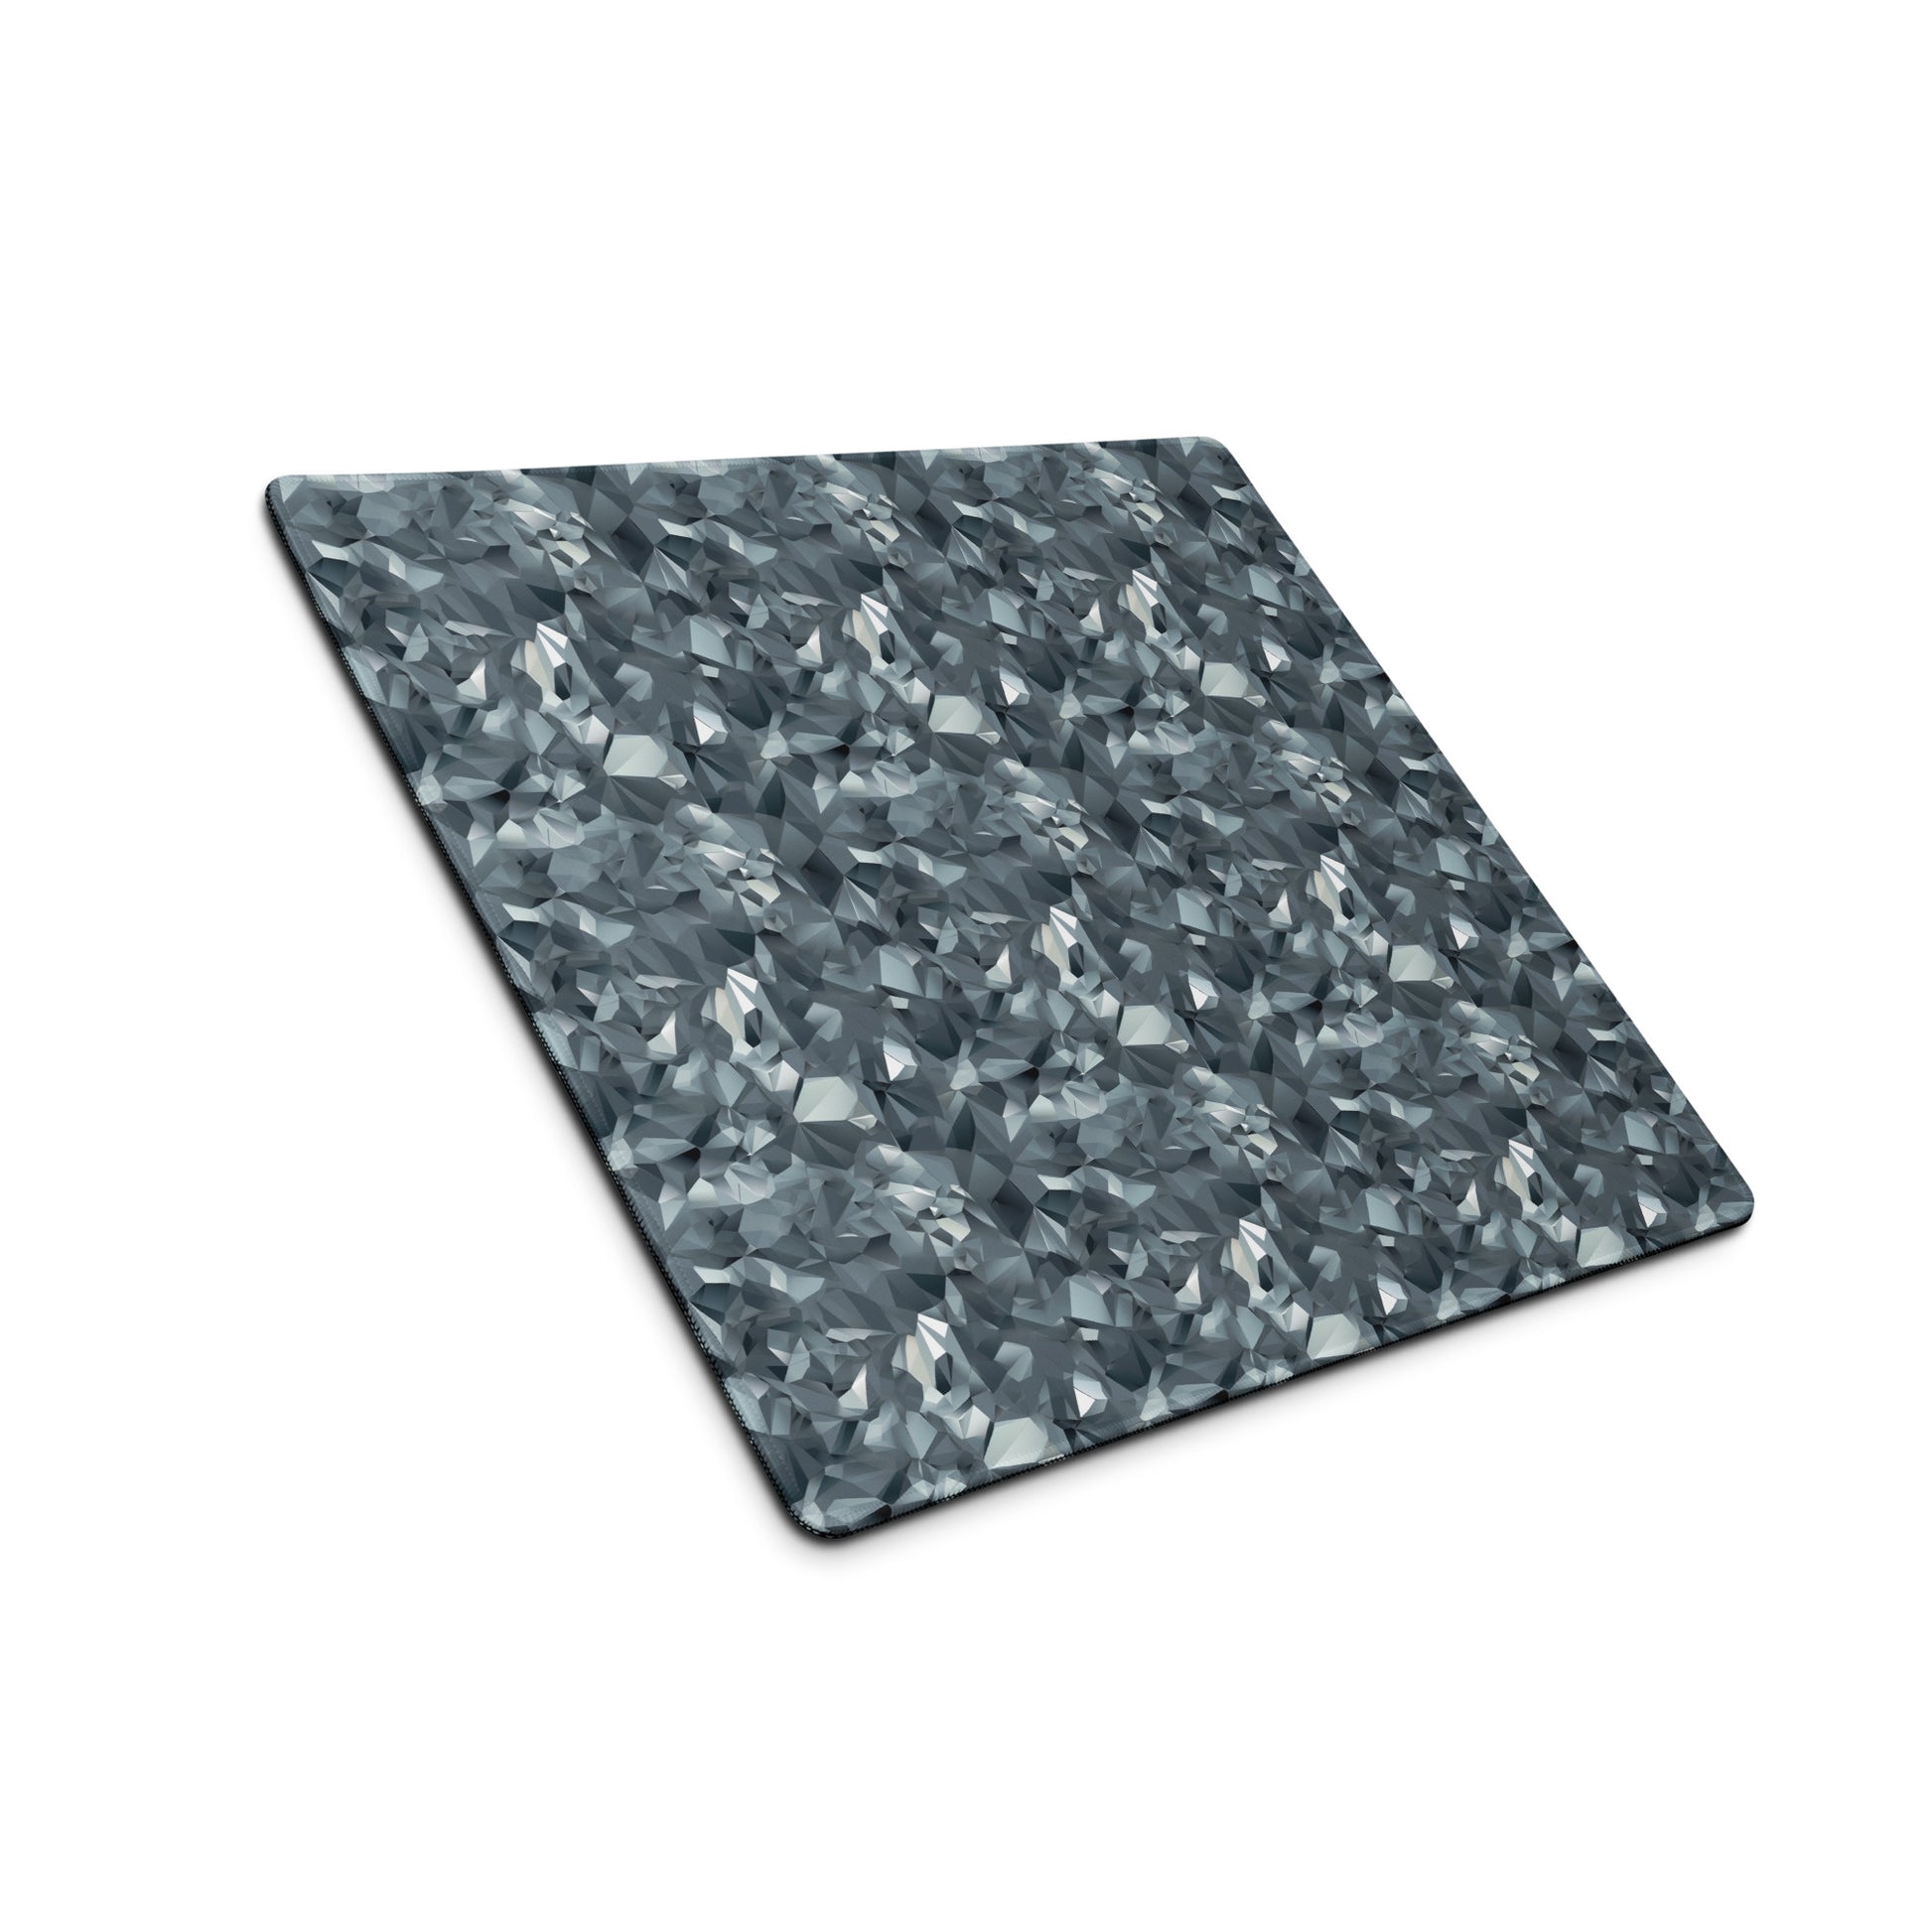 An 18" x 16" gaming desk pad with gray crystals sitting at an angle.